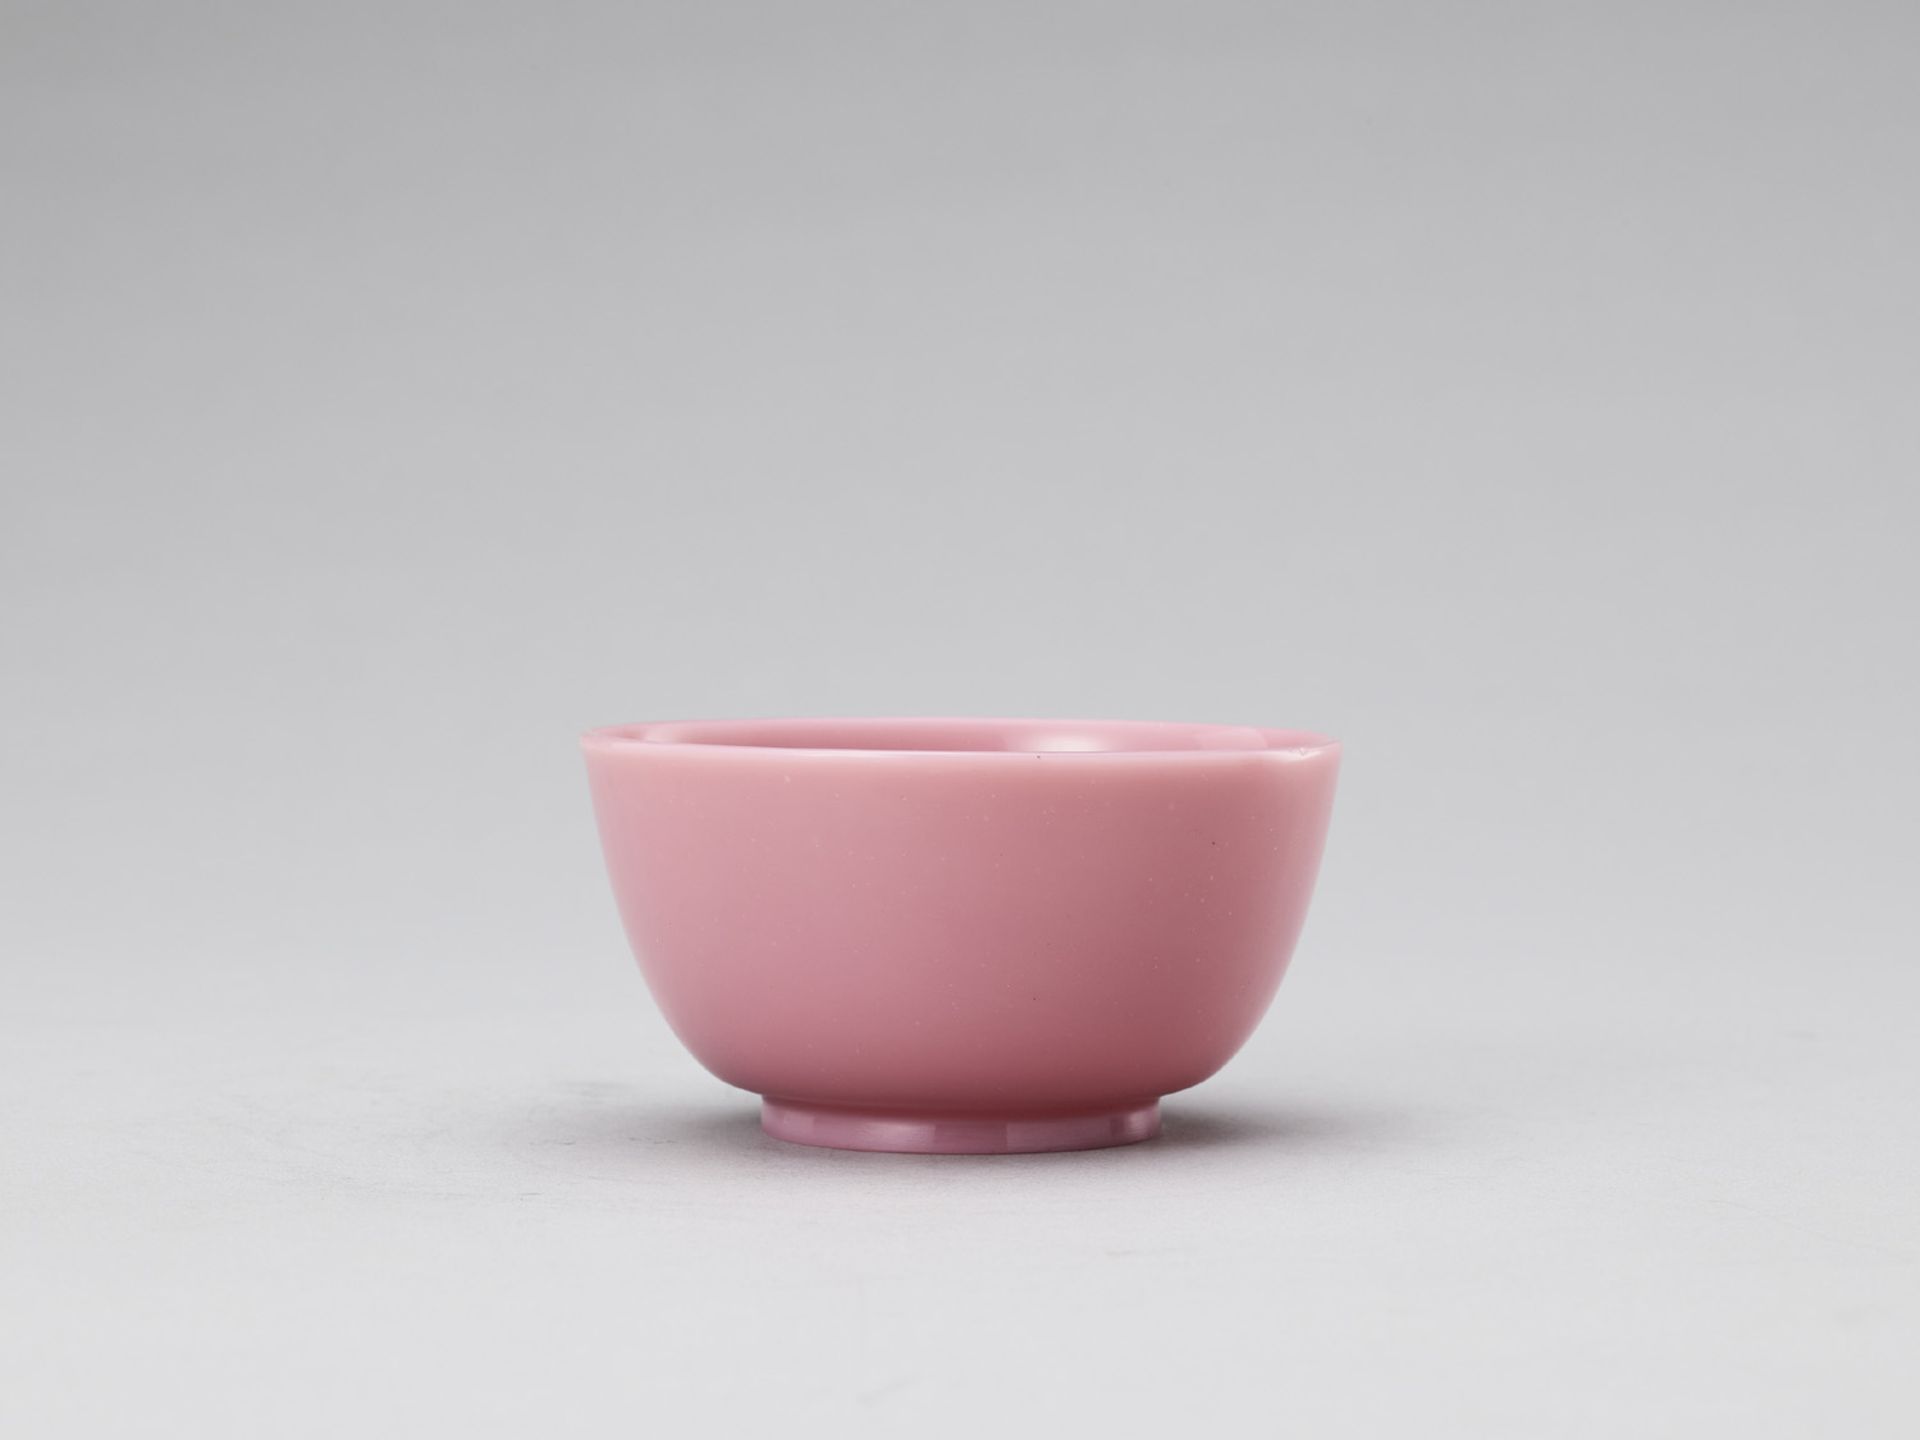 A SMALL PINK GLASS BOWL, QING